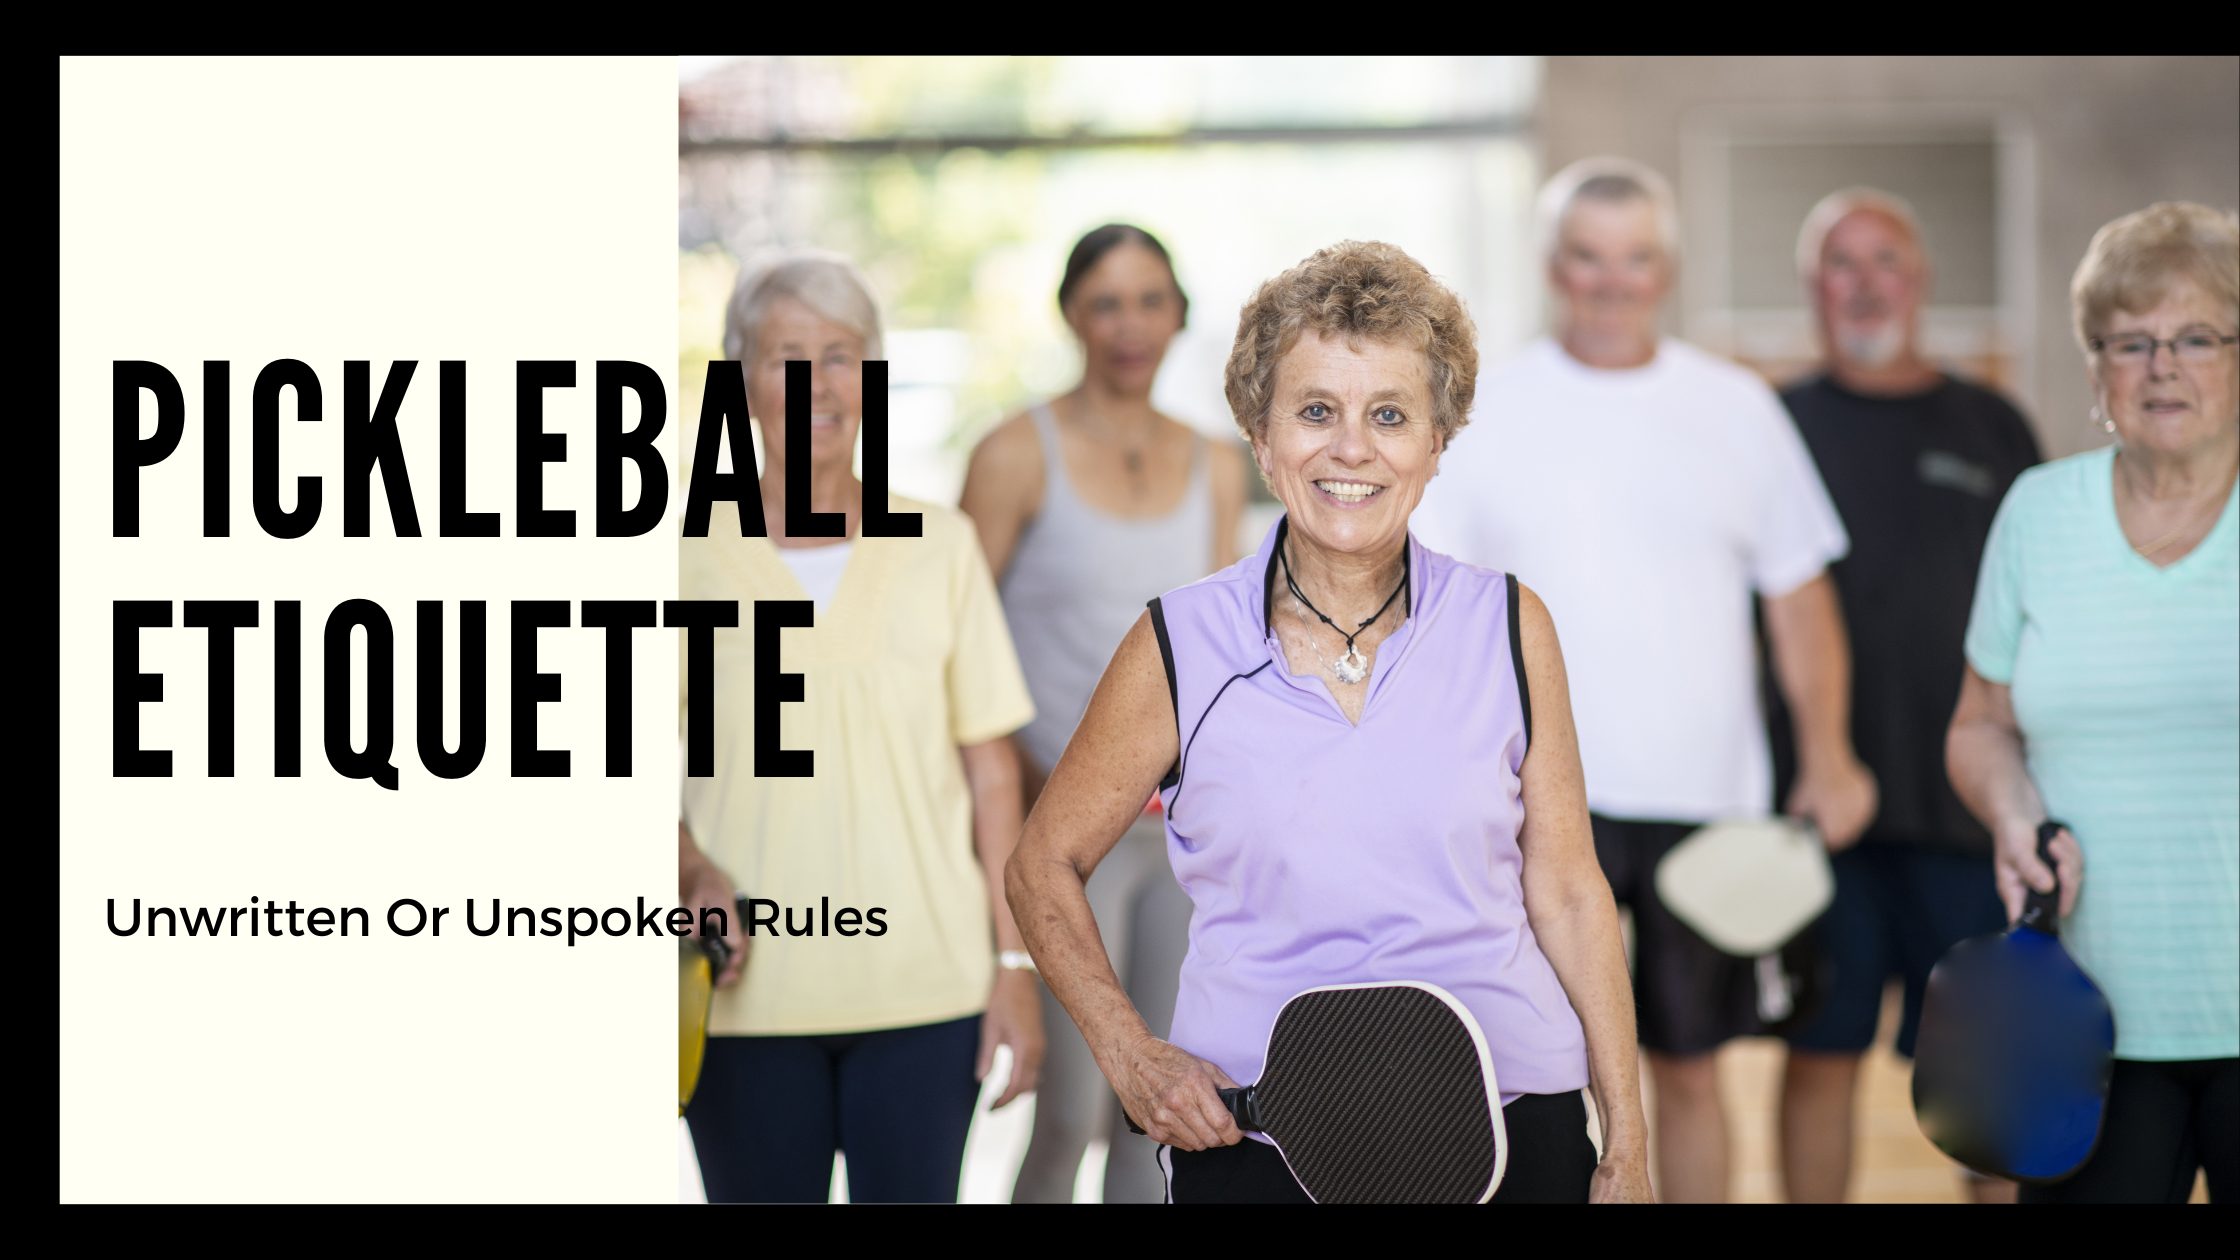 Pickleball Etiquette For Beginners & experienced players – Unwritten Rules